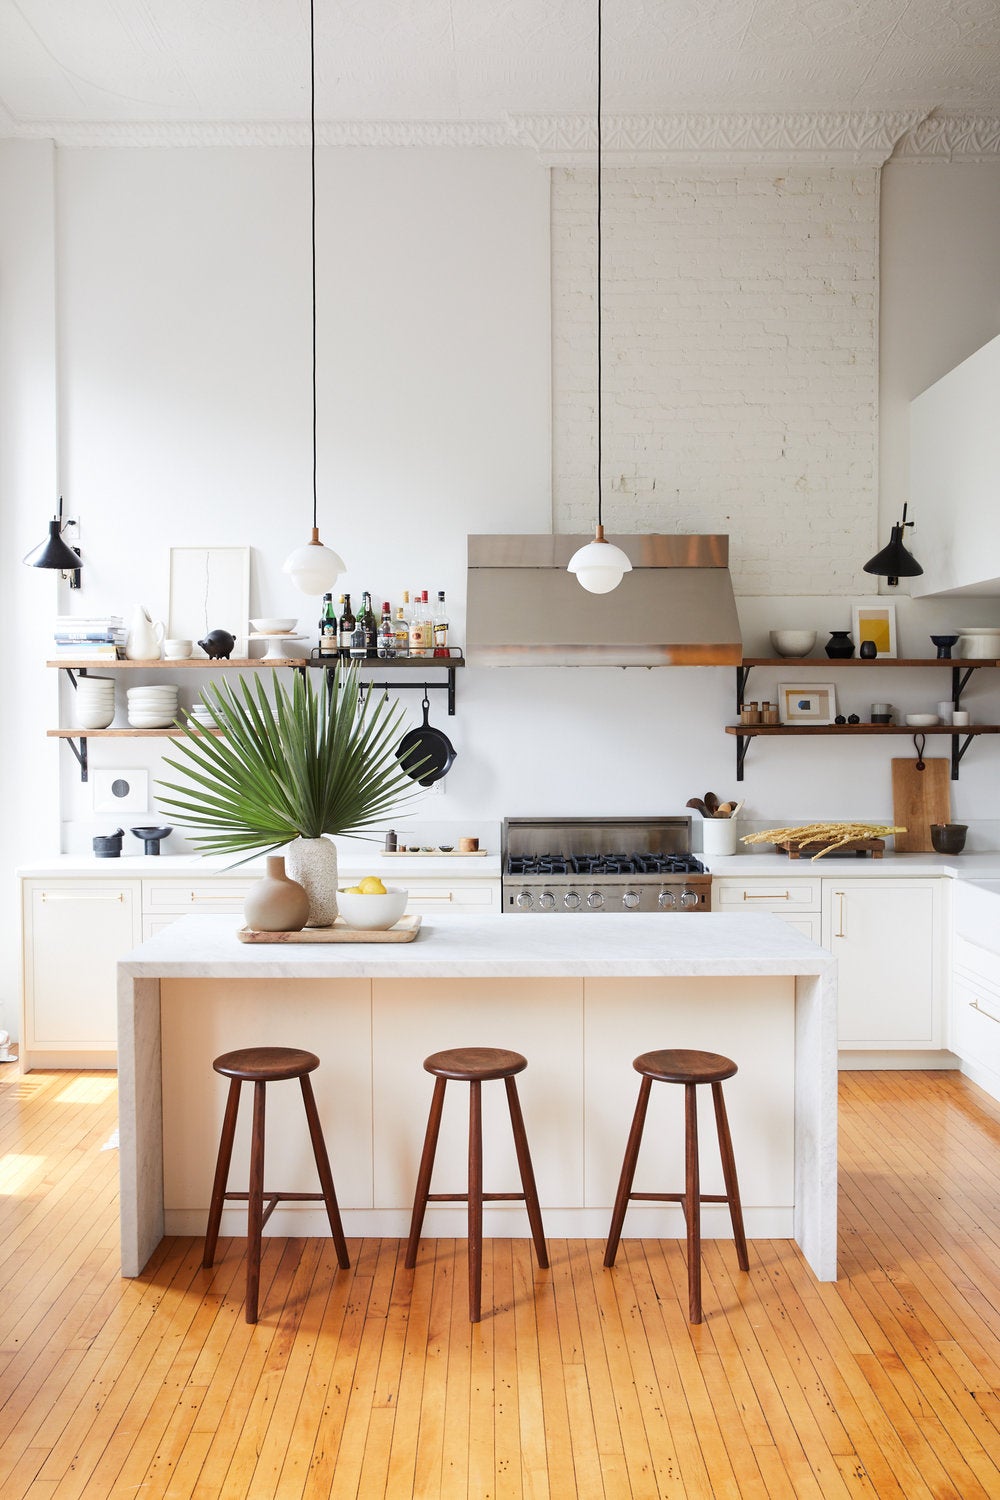 20 Beautiful Kitchen Ideas That Will Take Your Breath Away